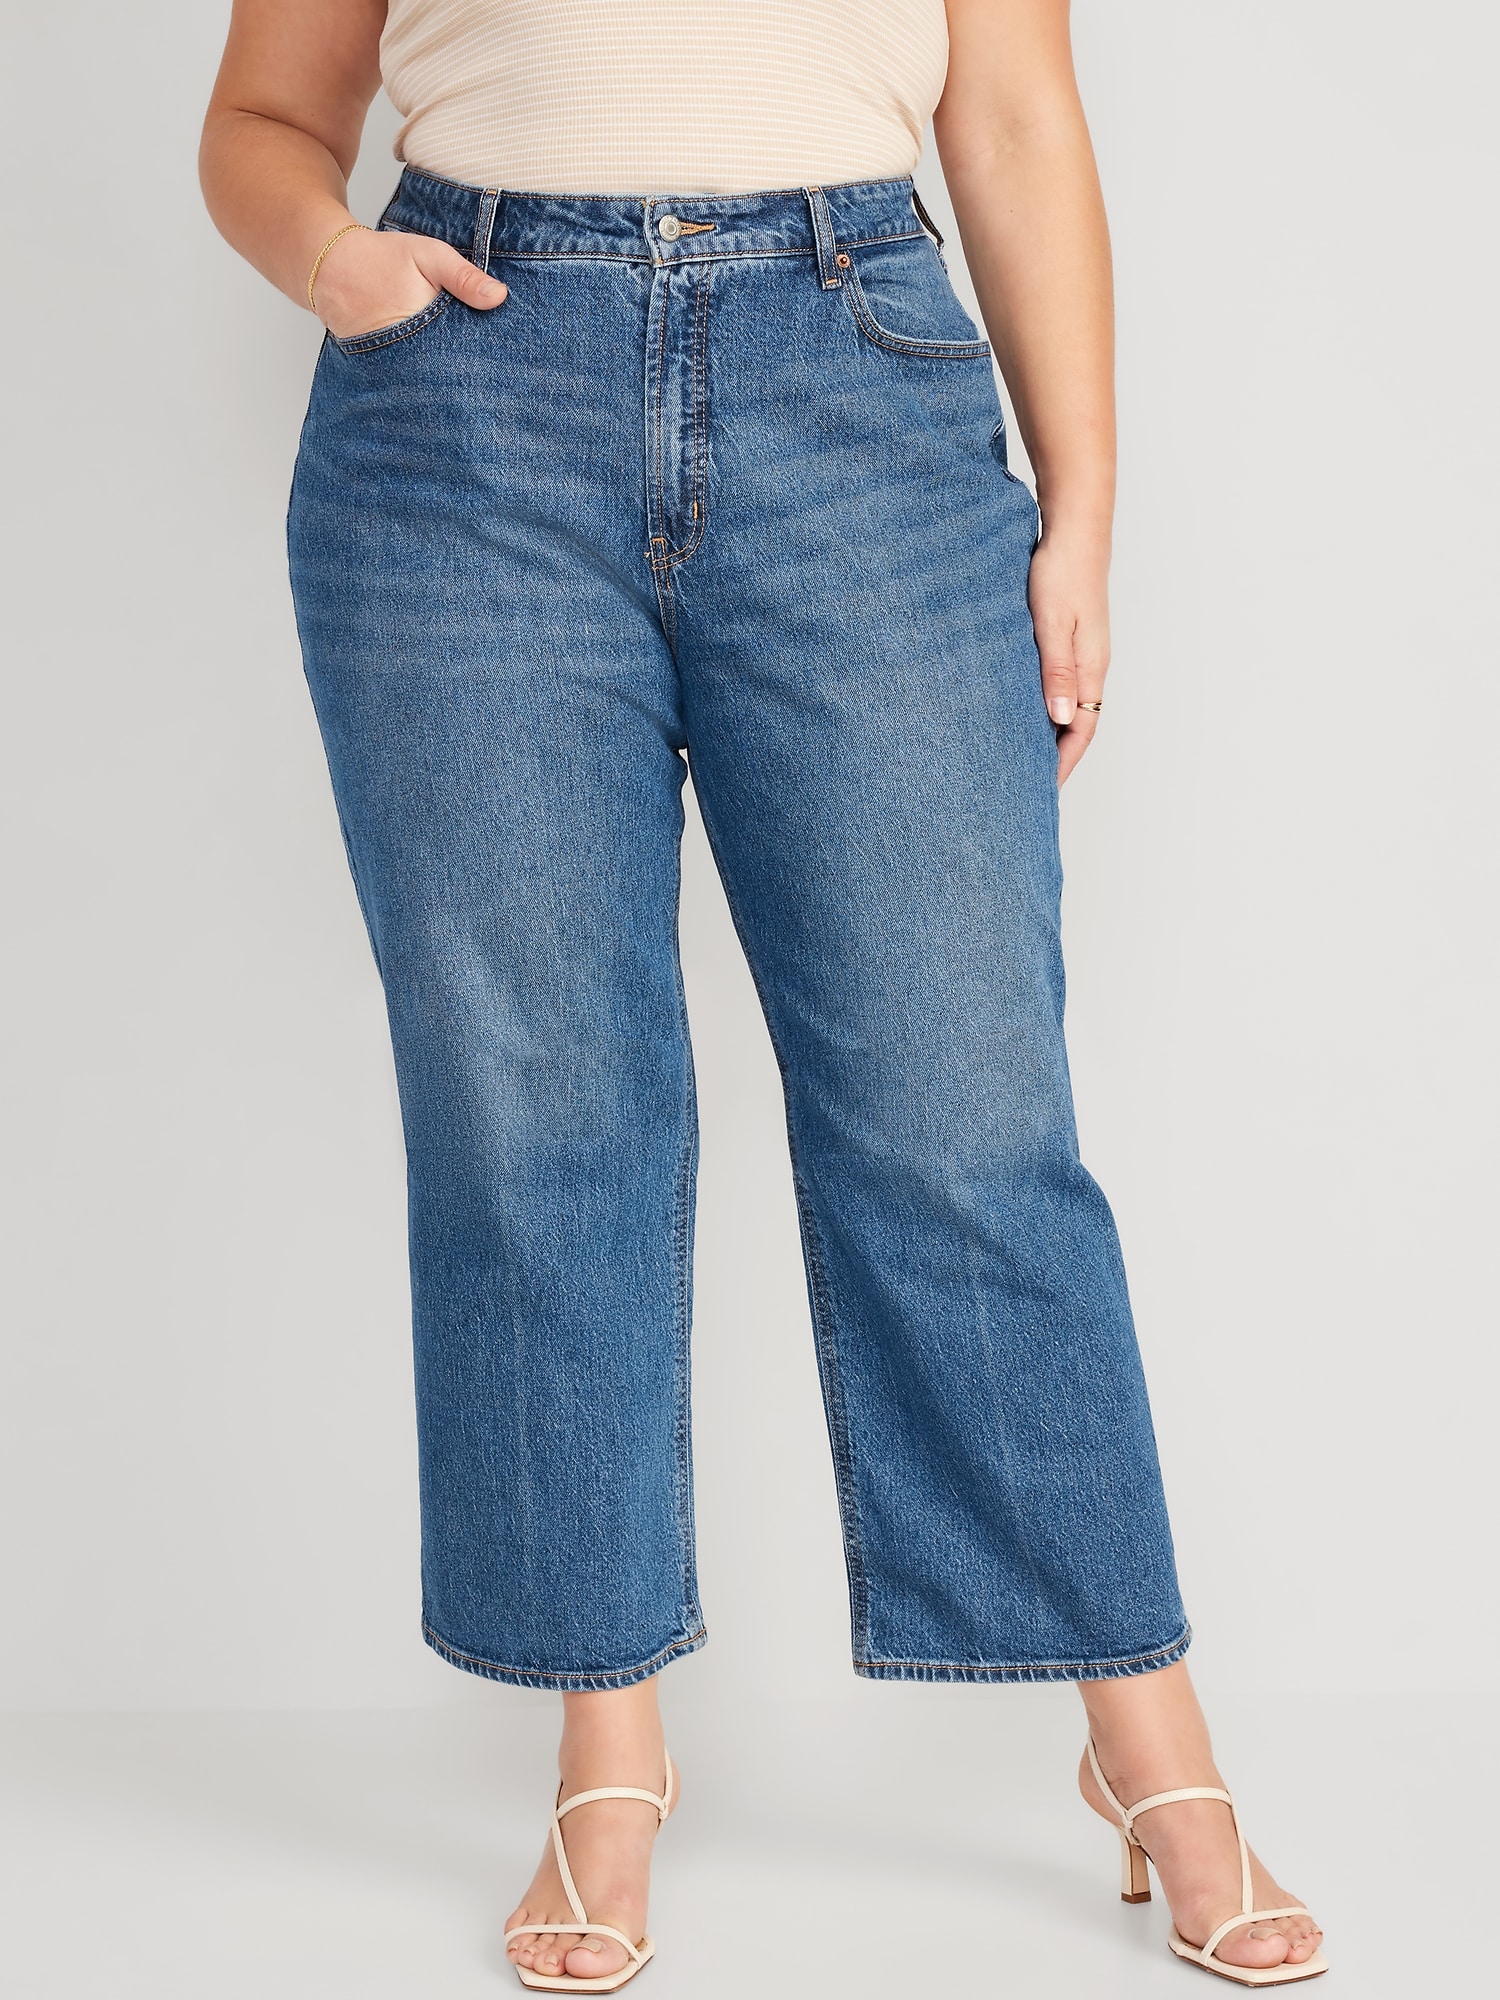 Extra High-Waisted Sky-Hi Wide-Leg Cut-Off Jeans for Women